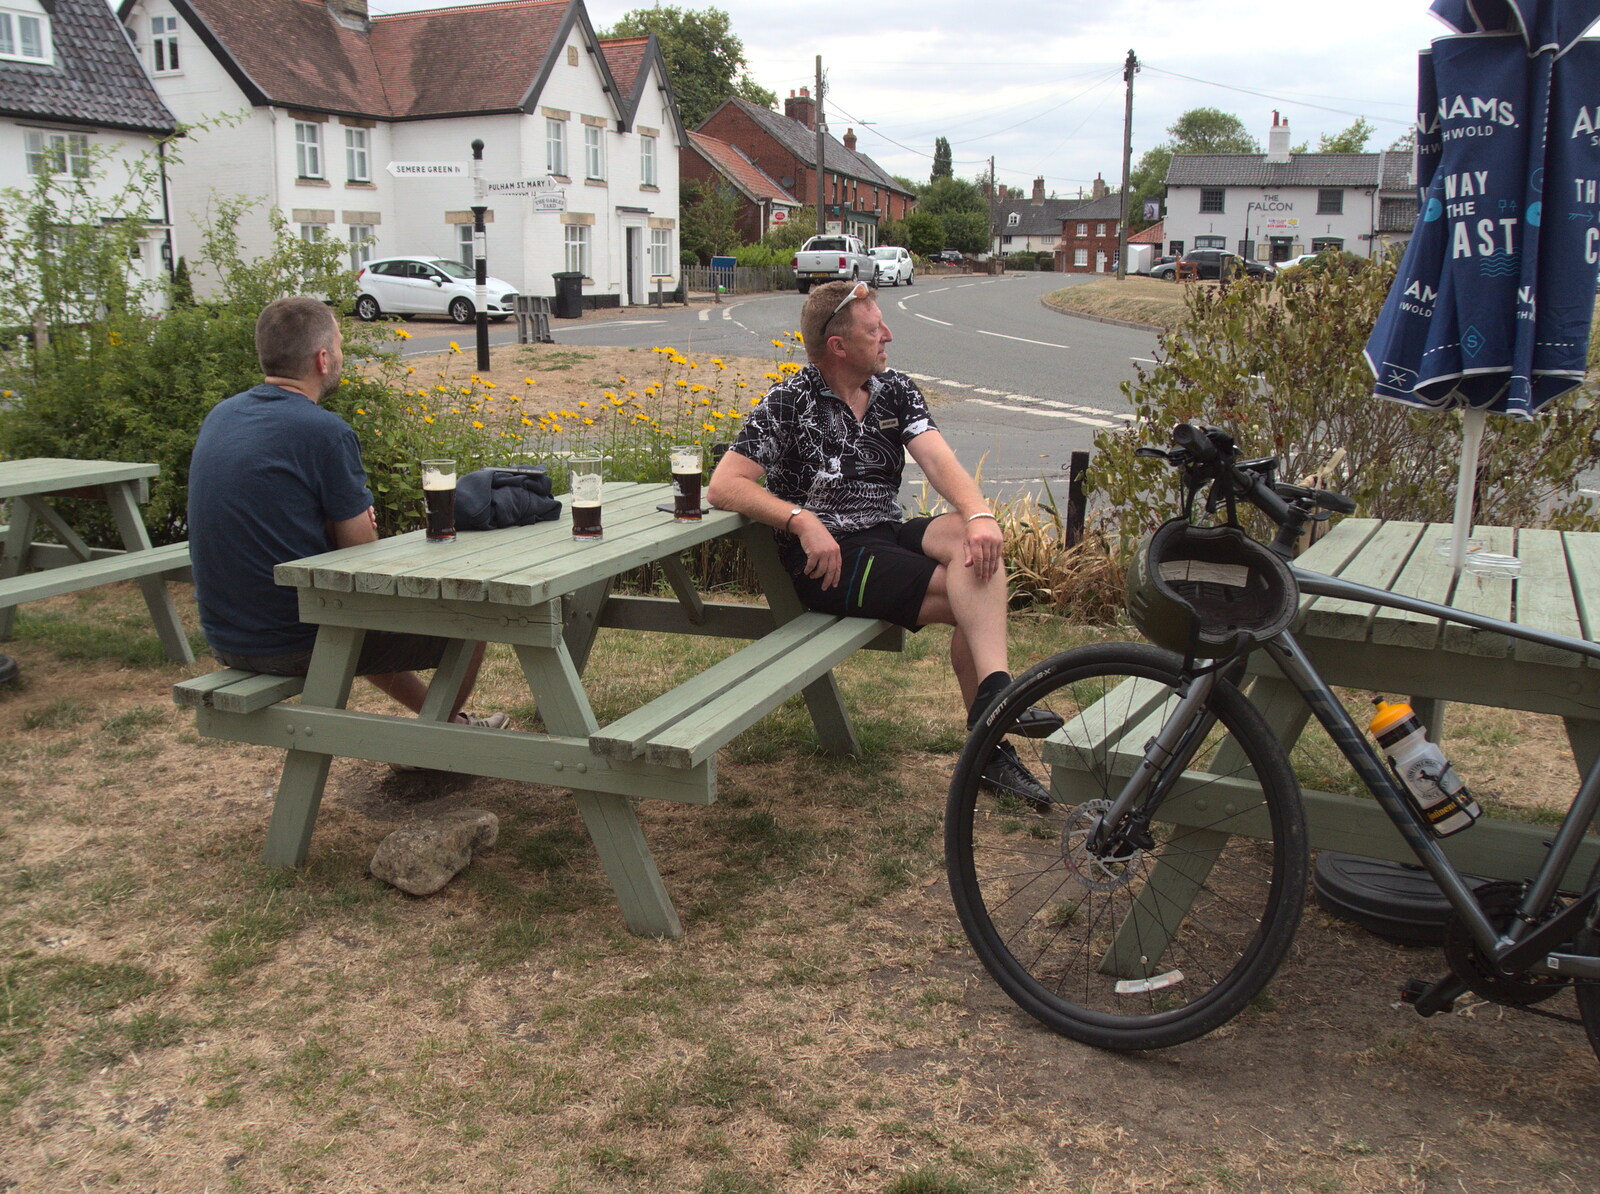 Phil, Gaz and Nosher's bike from The BSCC at Pulham and Marc's Birthday at Ampersand Tap, Diss, Norfolk - 6th August 2022